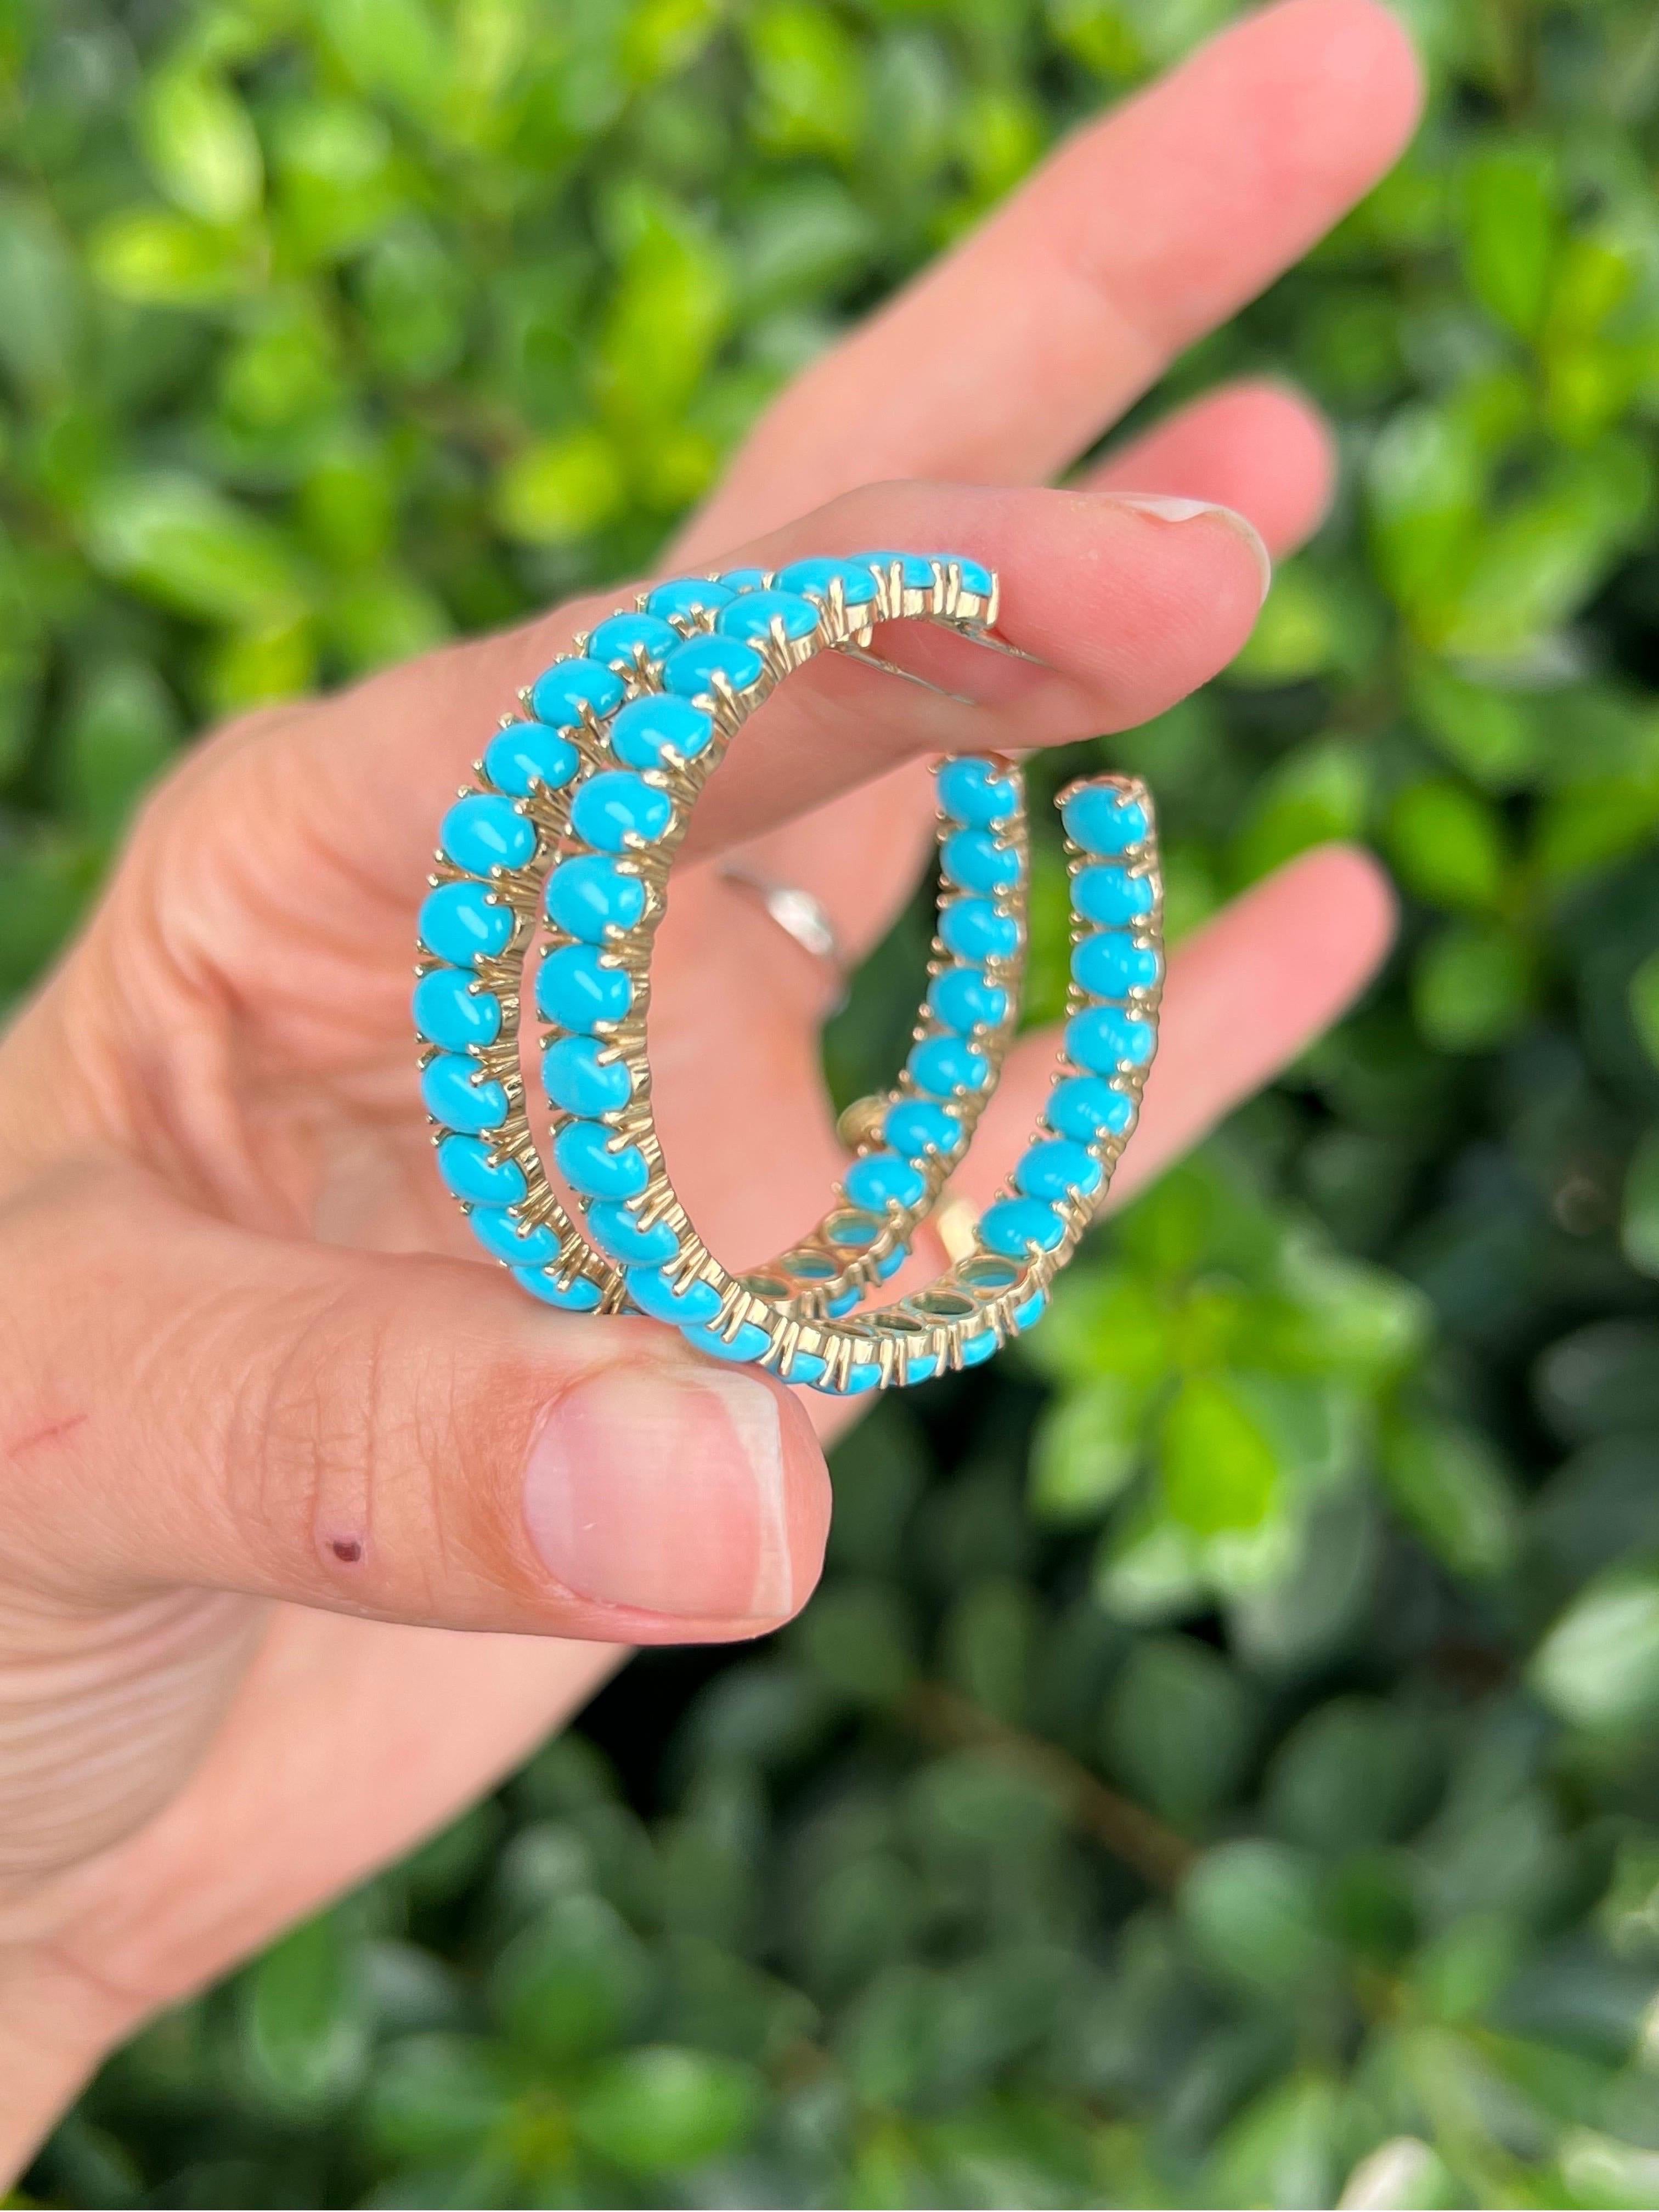 14k yellow gold turquoise hoop earrings. 40 mm in diameter and 6 mm width with an inside out design and a push back closure. 

Features
14K yellow gold
oval cabochon turquoise
post earring with push back
40mm diameter, 6mm width